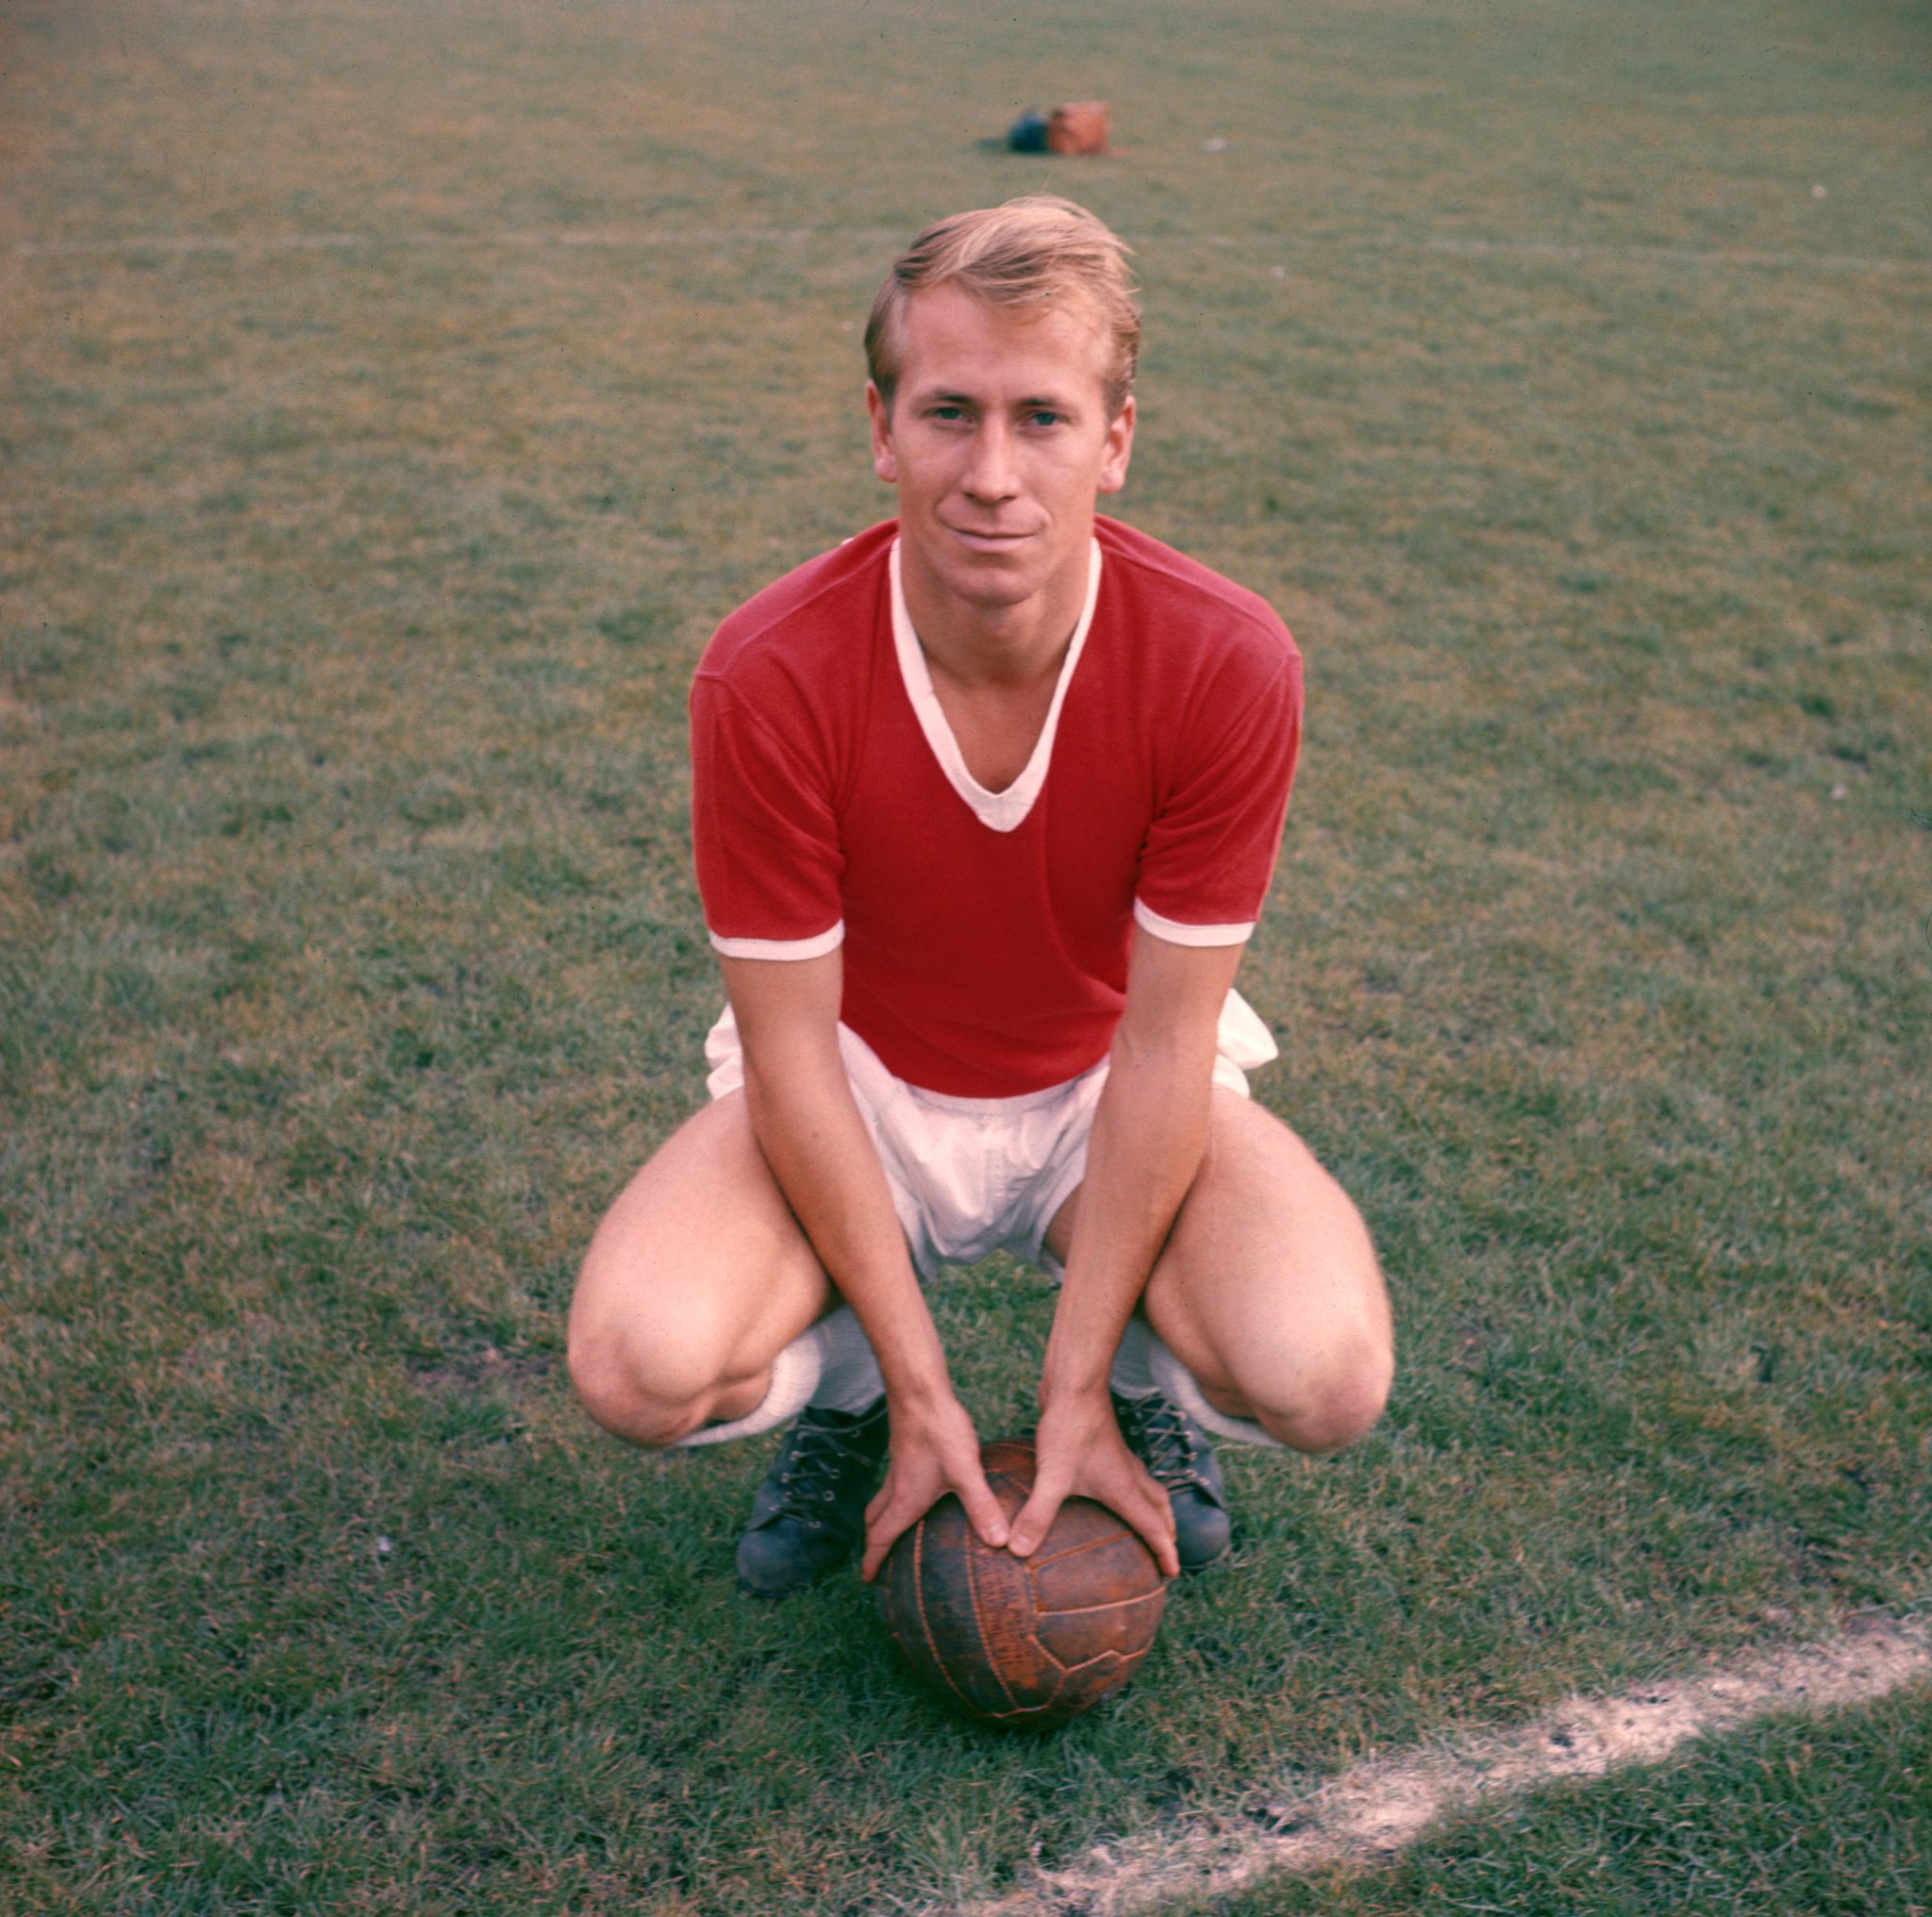  A true hero of English football, icon Sir Bobby Charlton is 80-years-old today. Happy birthday, Sir Bobby! 